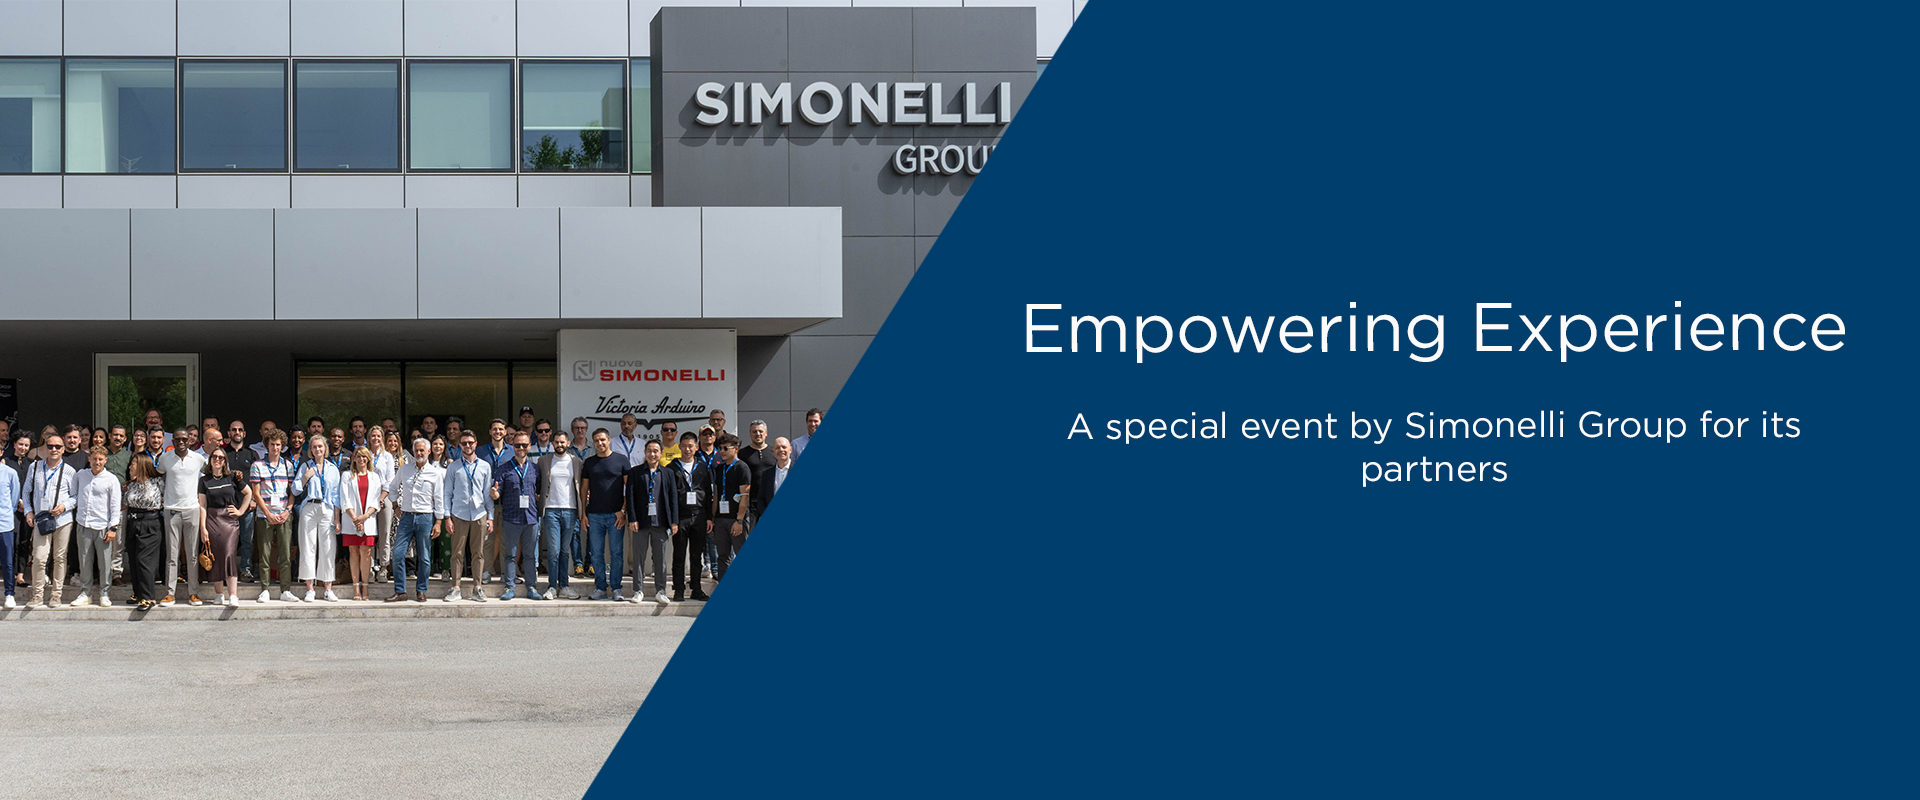 “Empowering Experience”, a special event by Simonelli Group for its partners.